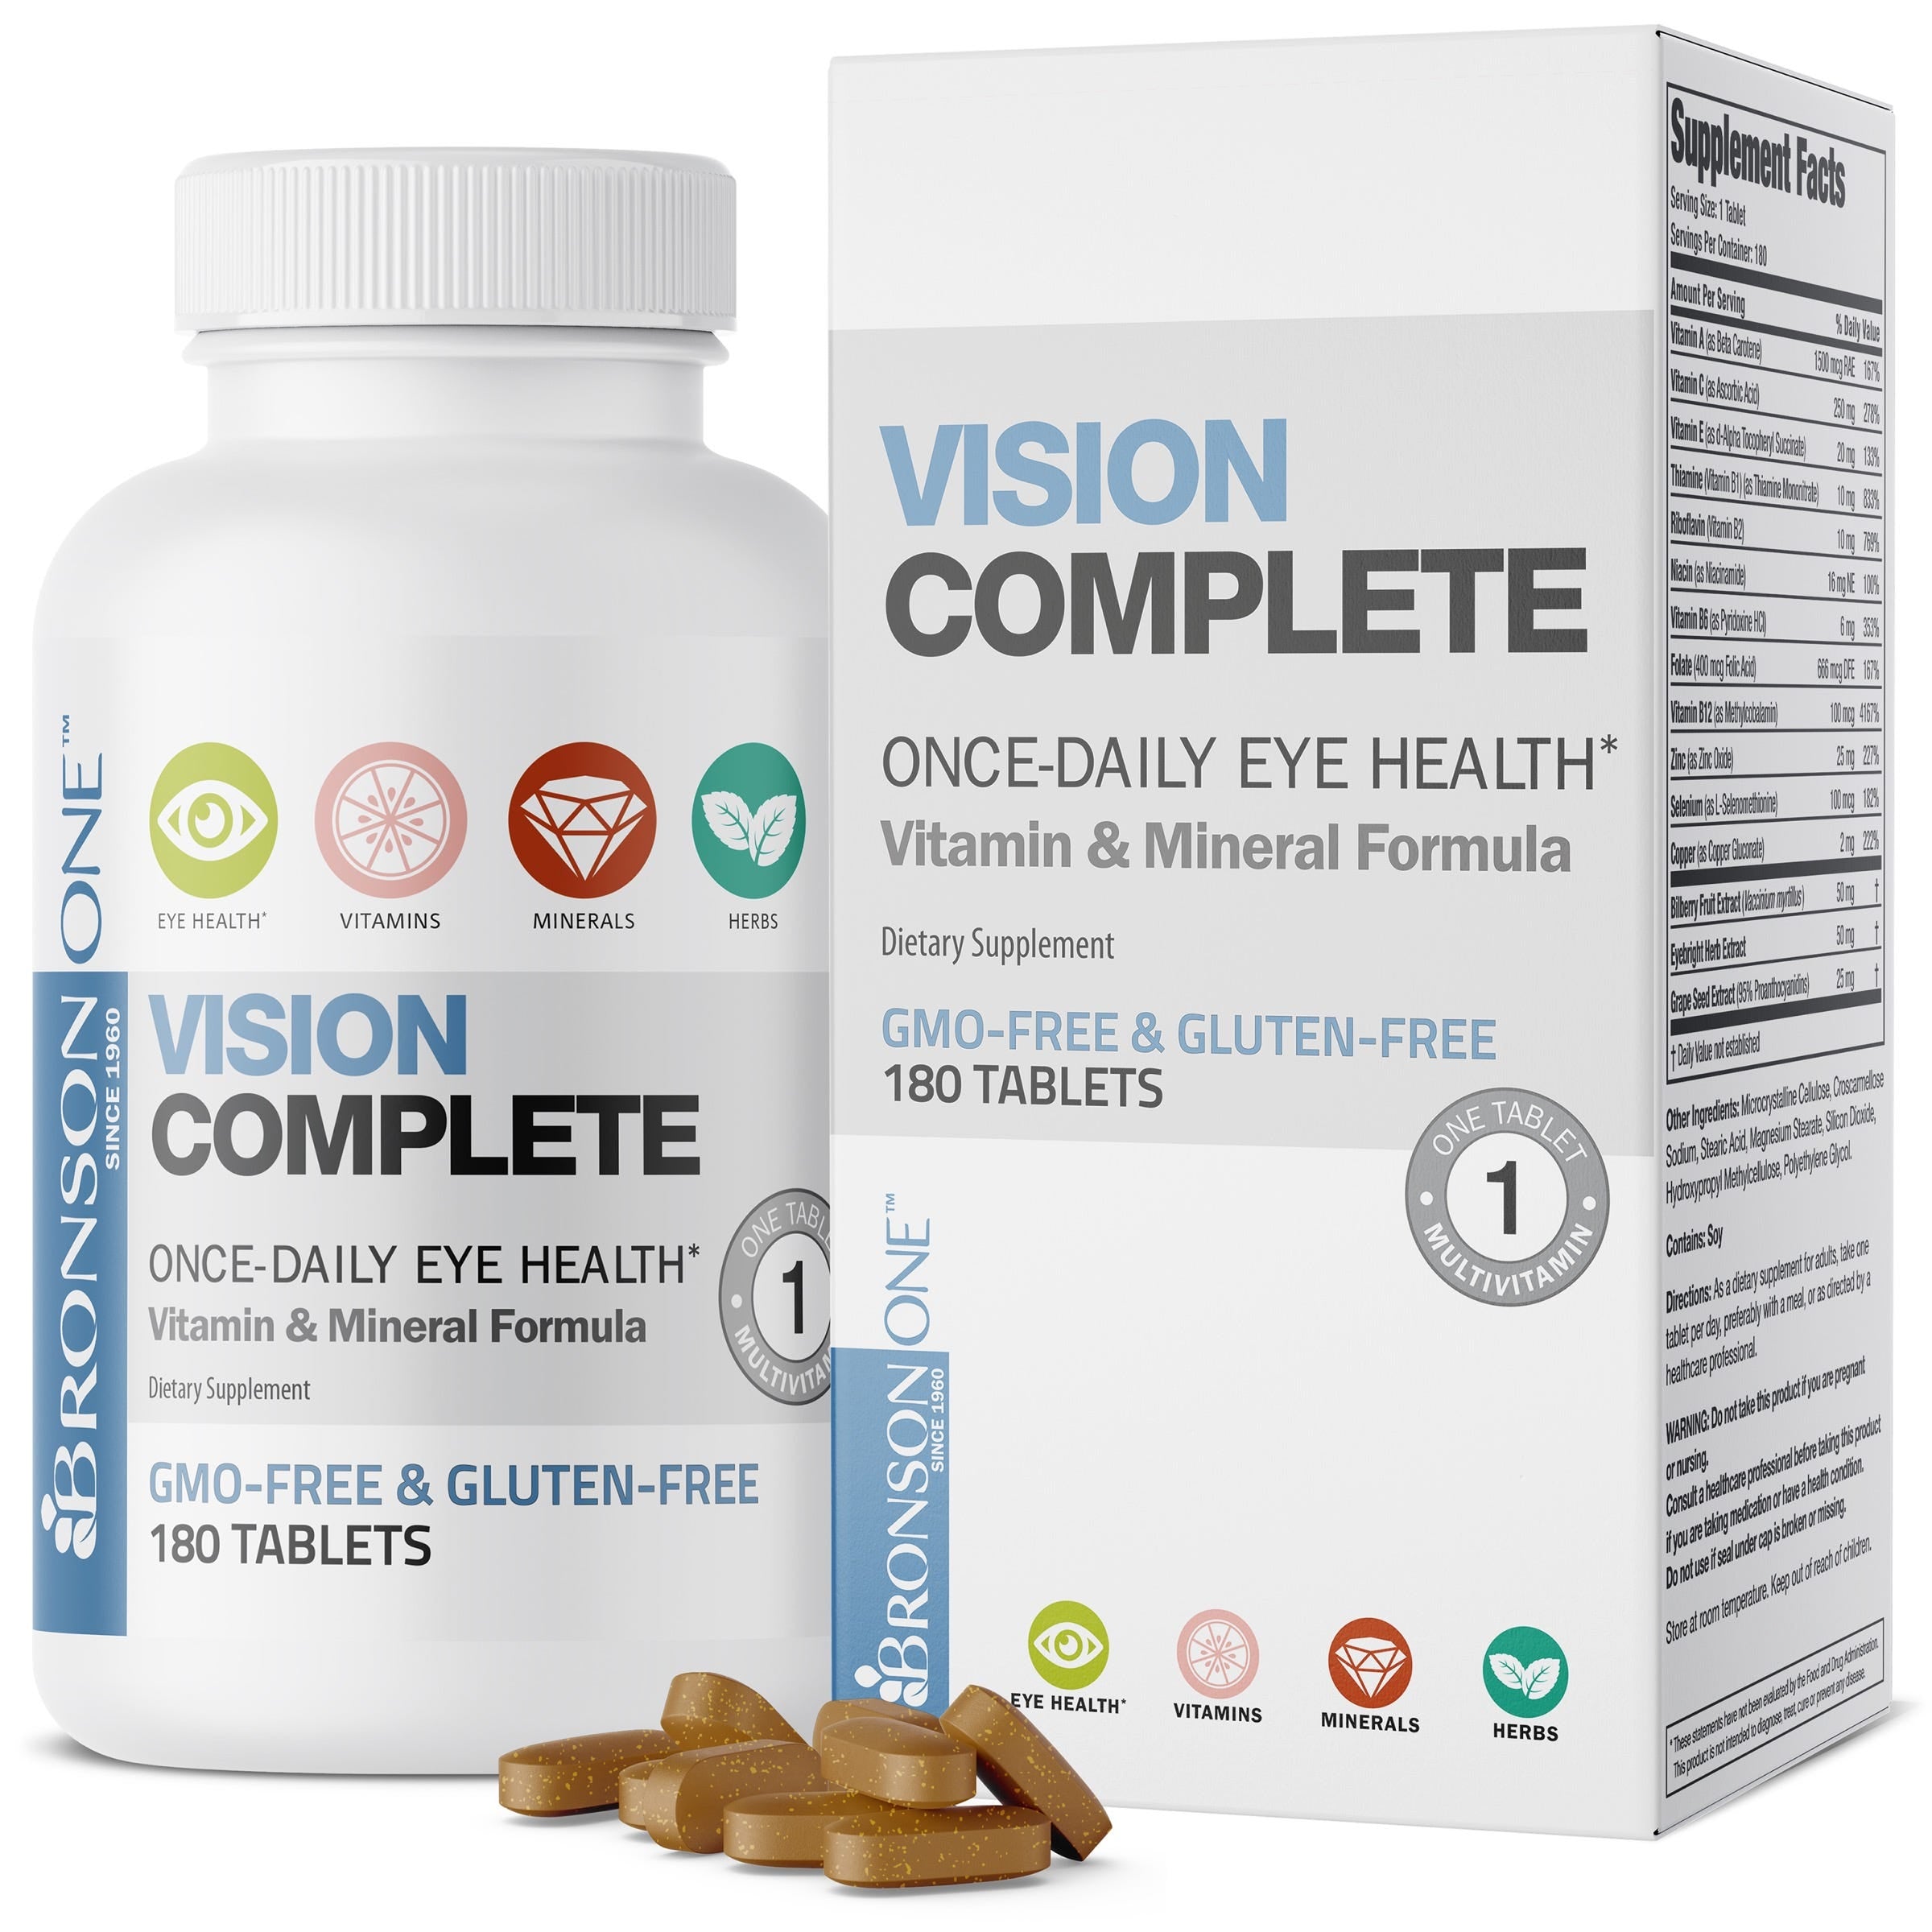 Bronson One™ Daily Vision Complete - 180 Tablets view 1 of 7